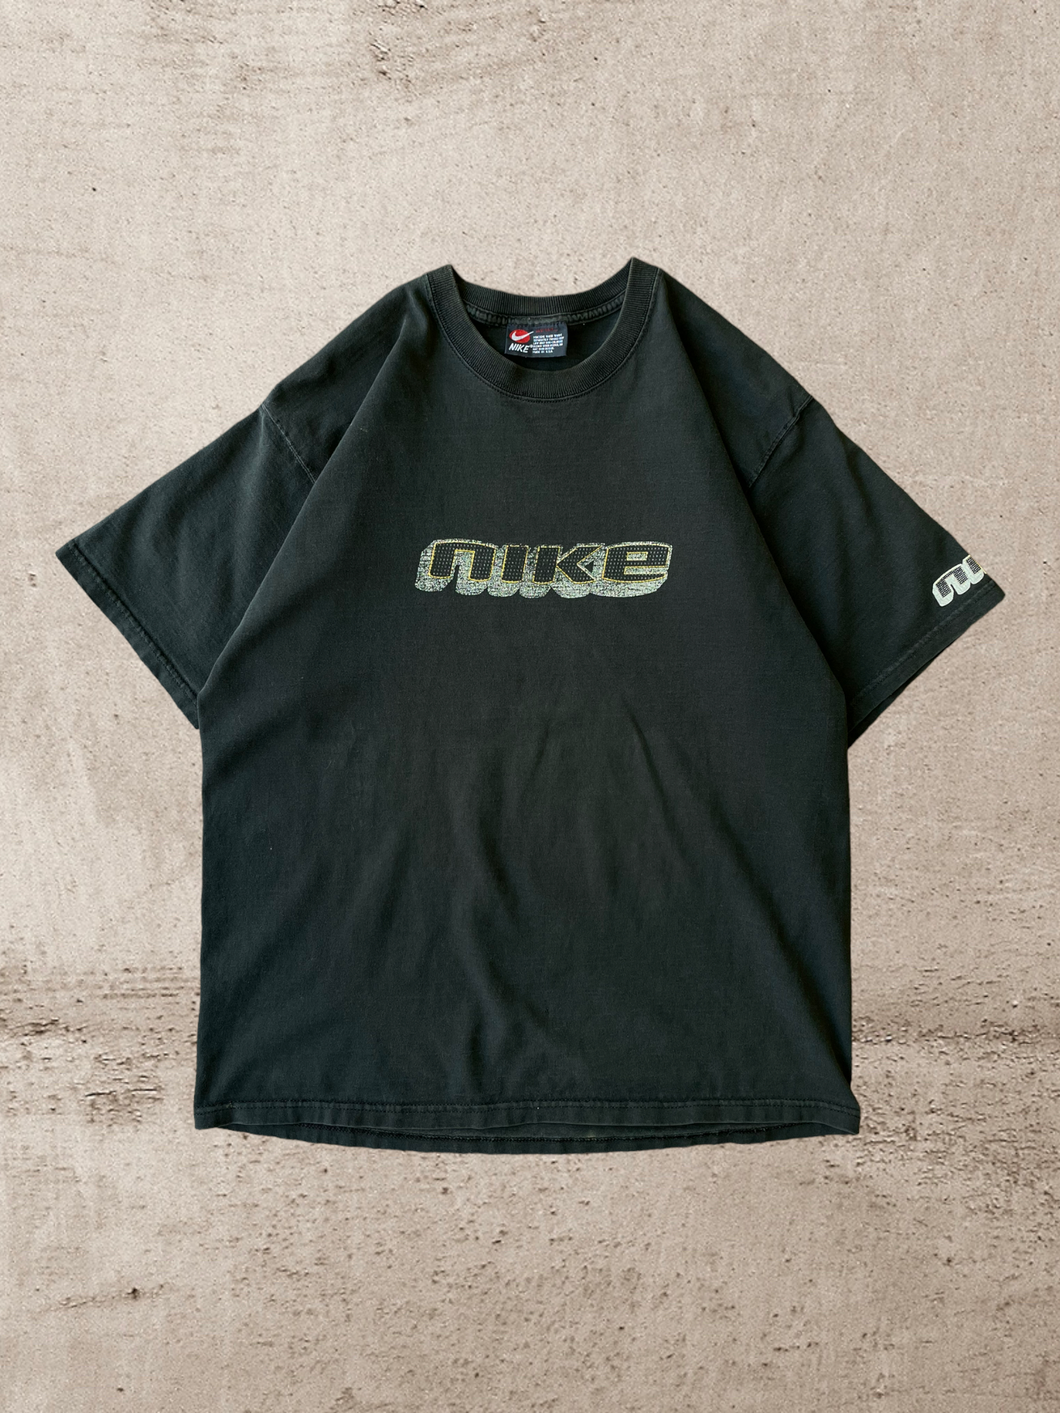 90s Nike Graphic T-Shirt - Large